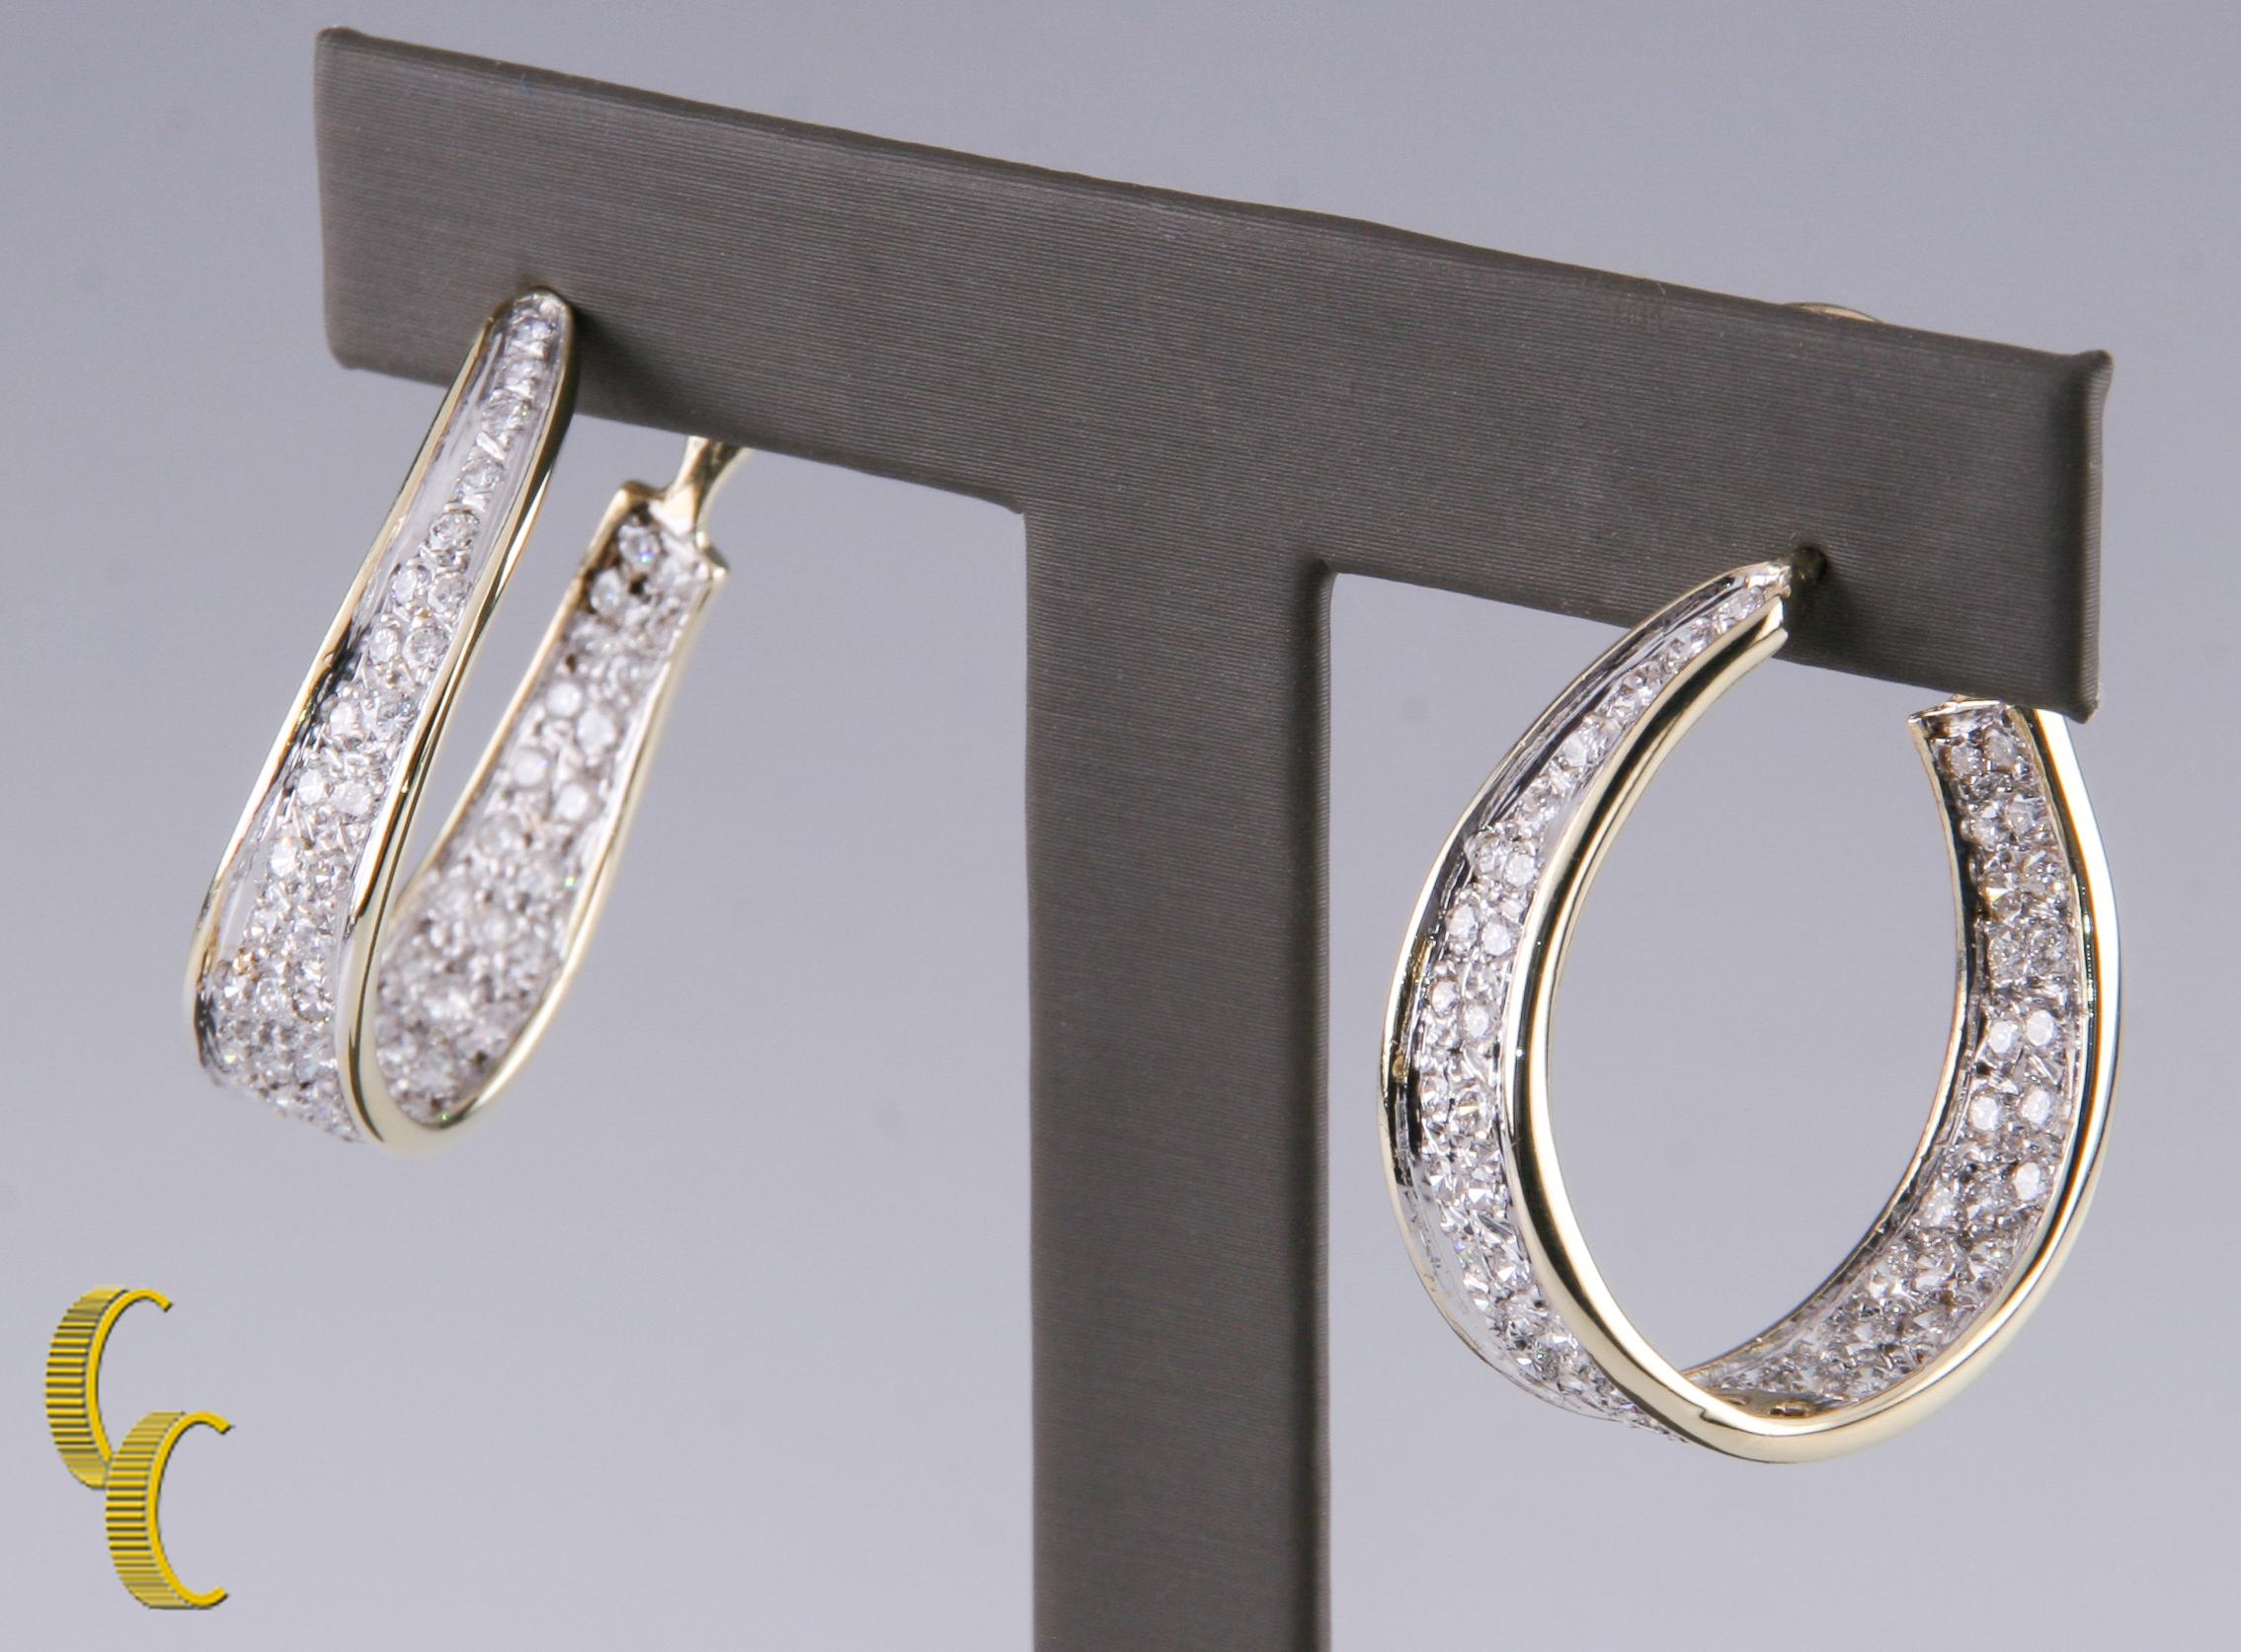 Gorgeous Two-Tone Gold Ribbon-like Hoop Earrings w/ Pave-Set Round Brilliant Diamonds
Total Diamond Weight = 5.5 carats
Average Color = G - H
Average Clarity = VS - SI
Length of Drop = 33 mm
Width of Hoop (at Widest) = 8 mm
Total Mass = 13.9